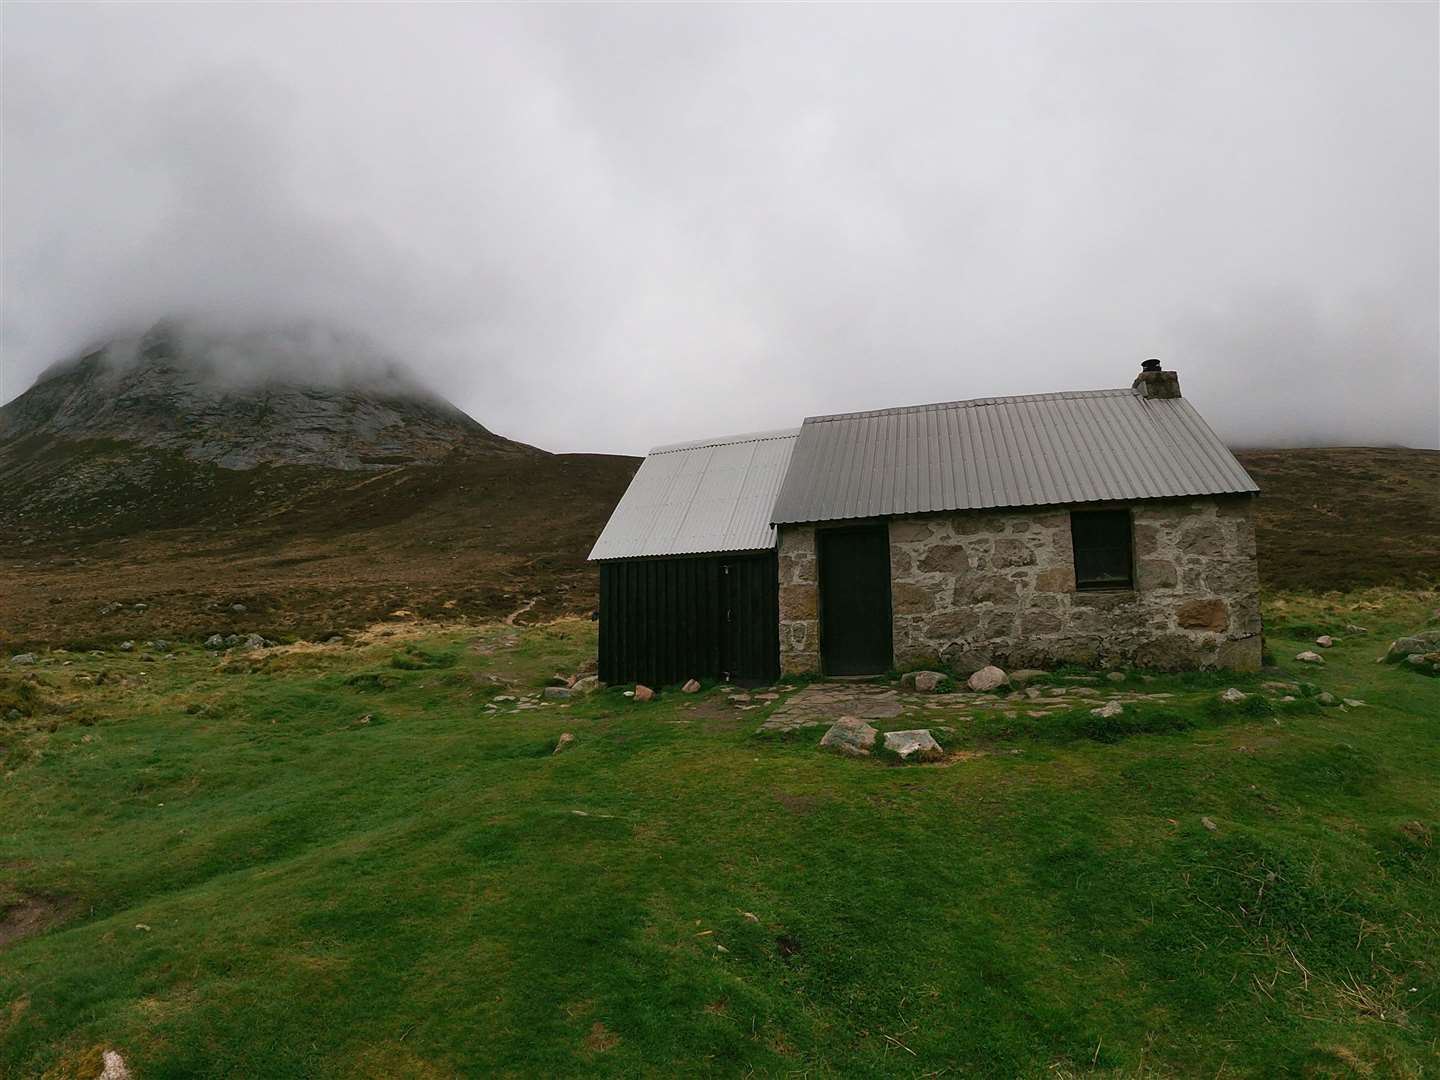 Corrour Bothy is located in below Coire Odhar between The Devil's Point and Cairn Toul on the western side of the River Dee in the Lairig Ghru.